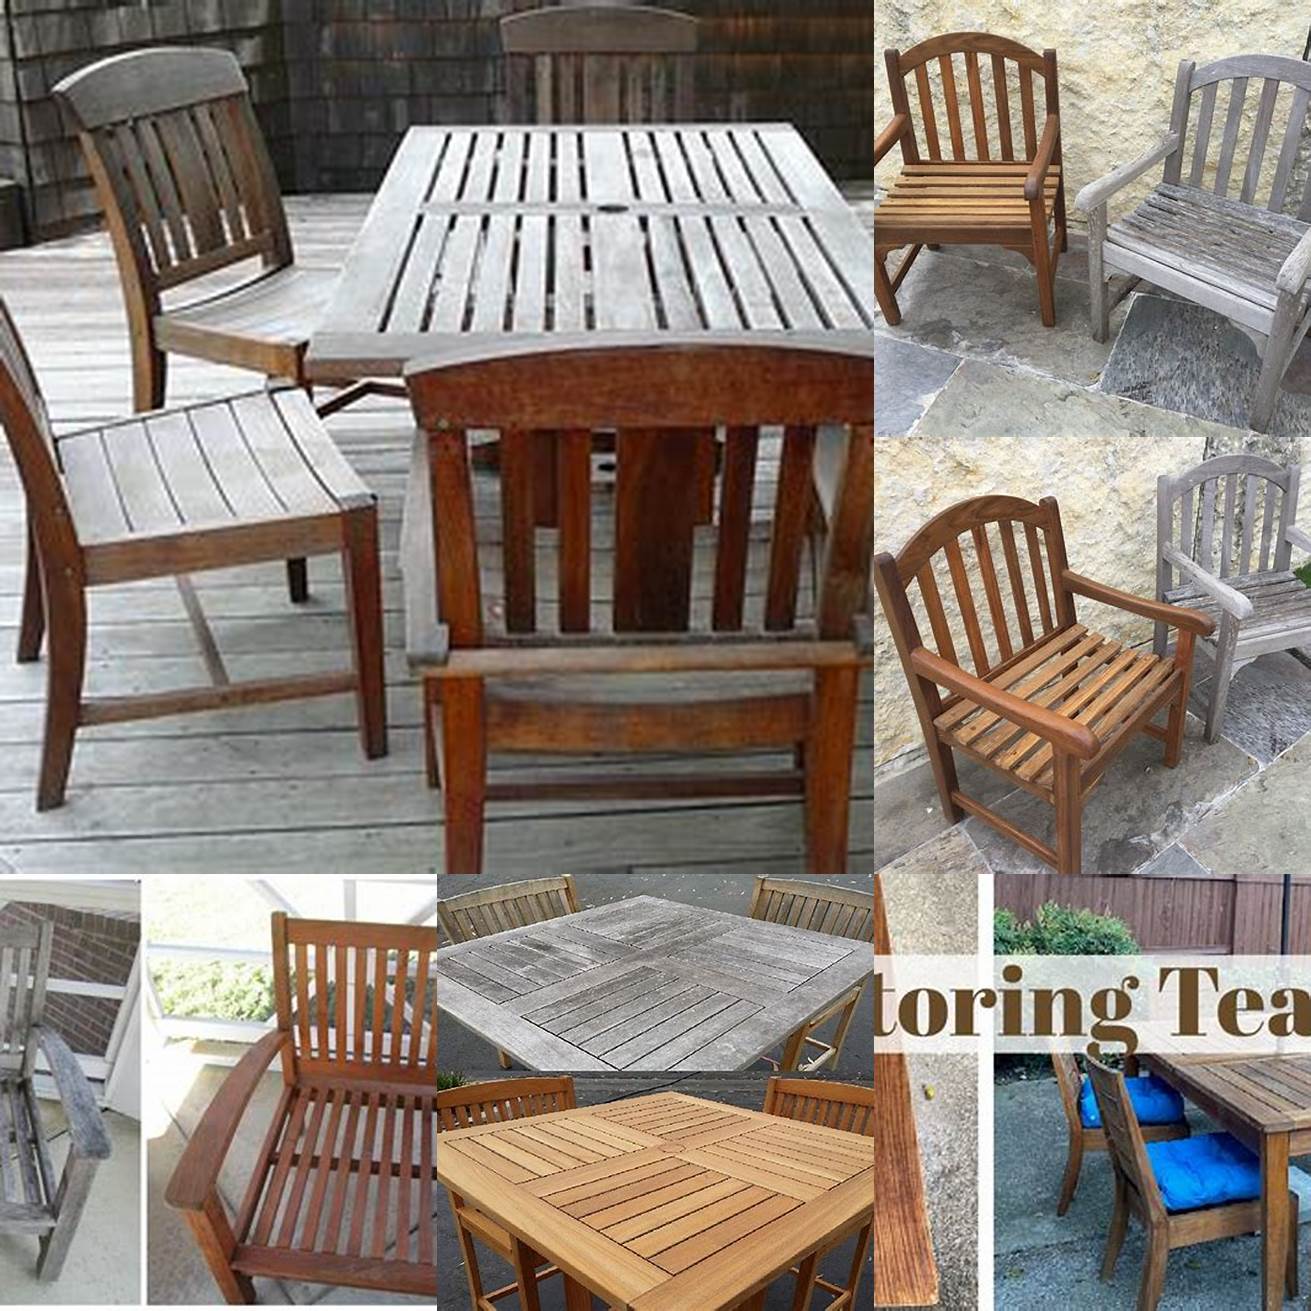 Image of Teak Furniture Before and After